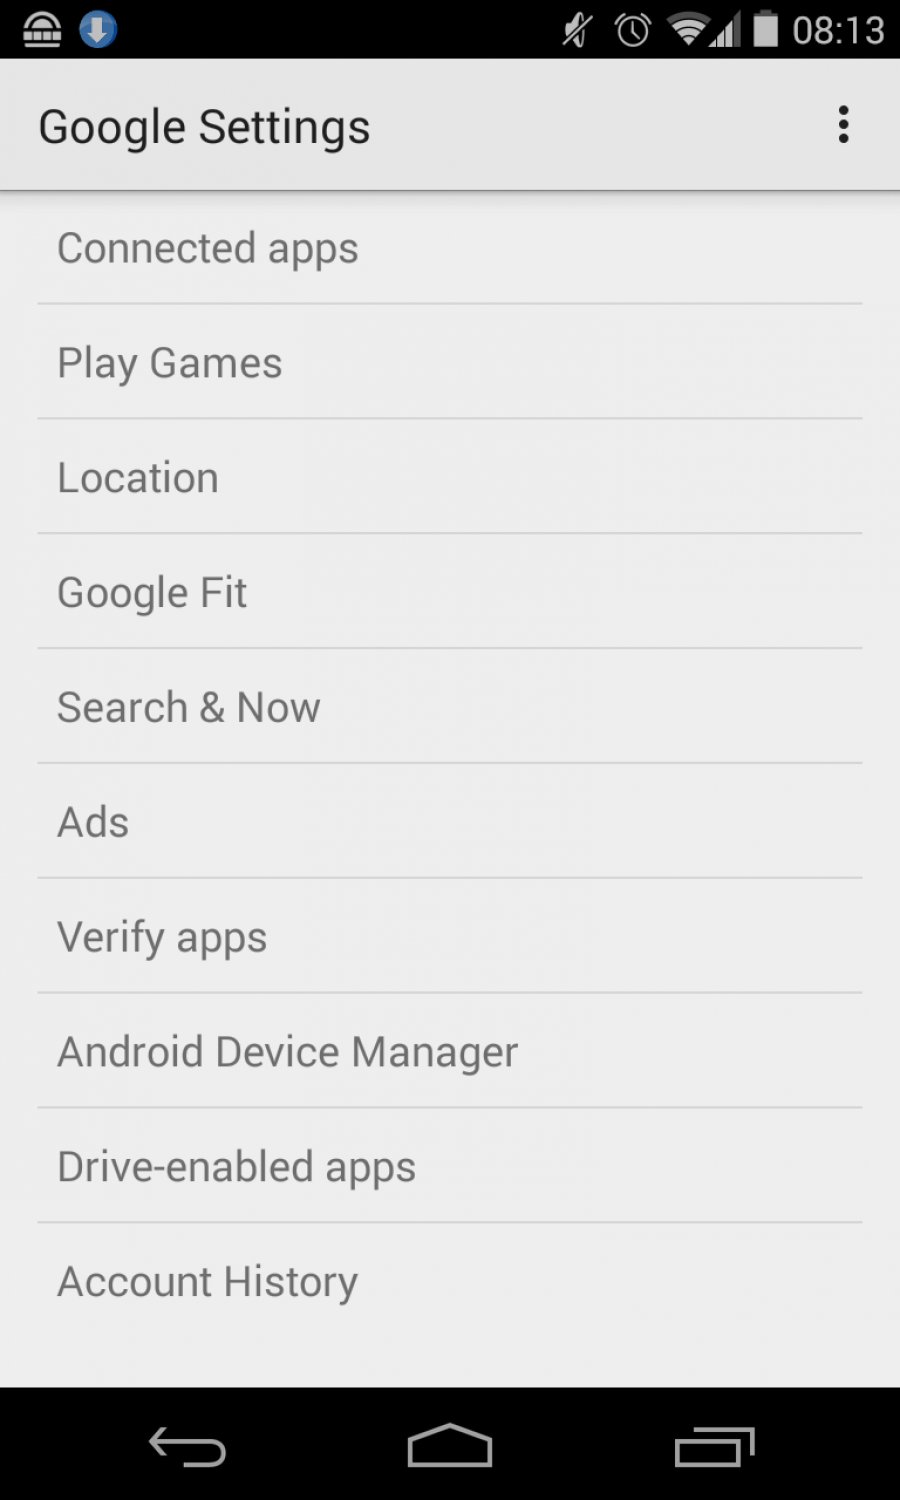 google play services apk for android 4.4.2 free download